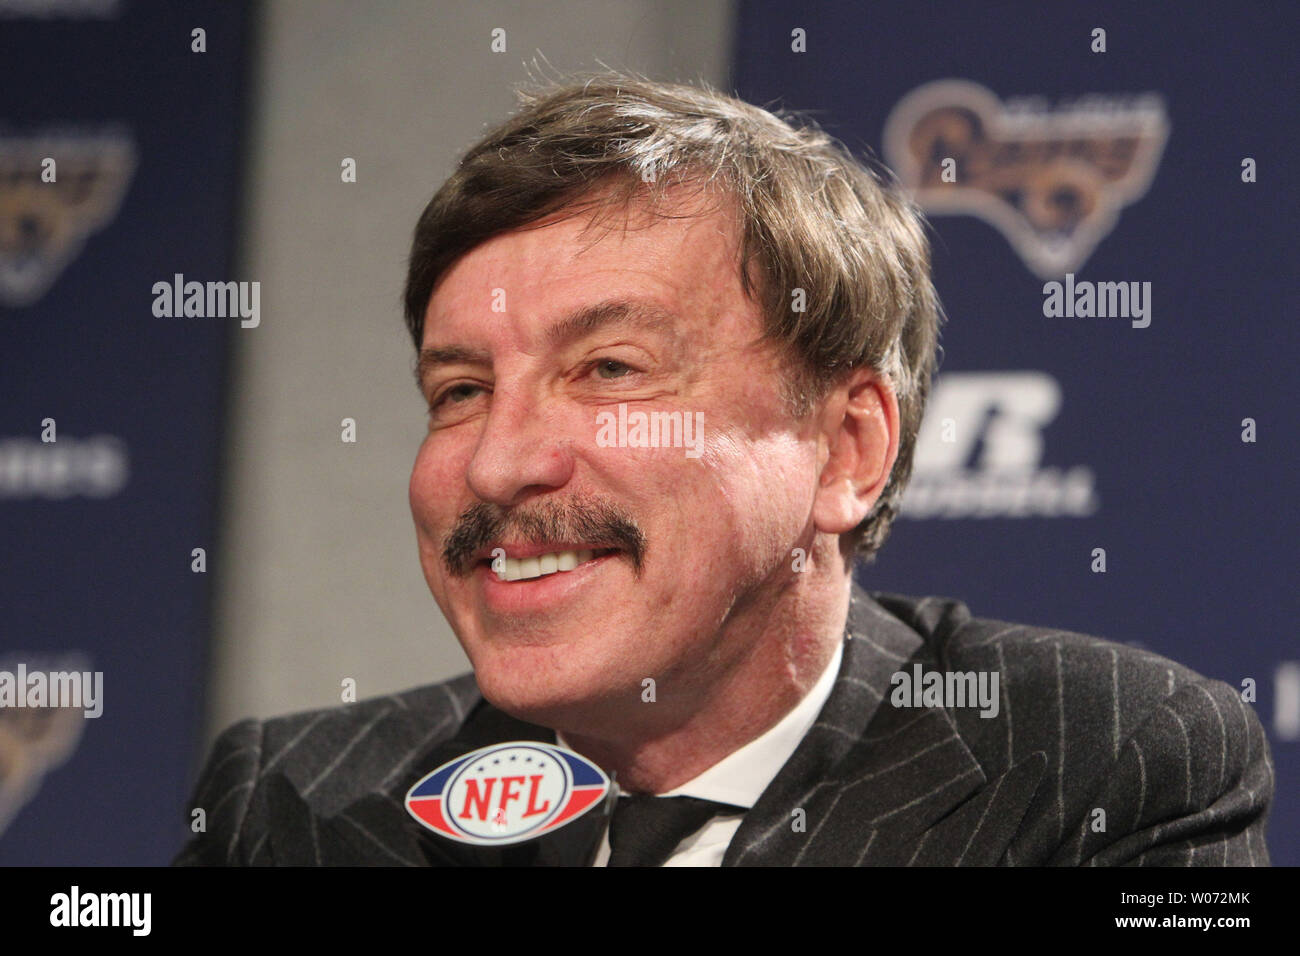 St. Louis Rams team owner Stan Kronke is all smiles as he talks about the new head coach Jeff Fisher at the team's practice facility in Earth City, Missouri on January 17, 2012.   UPI/Bill Greenblatt Stock Photo